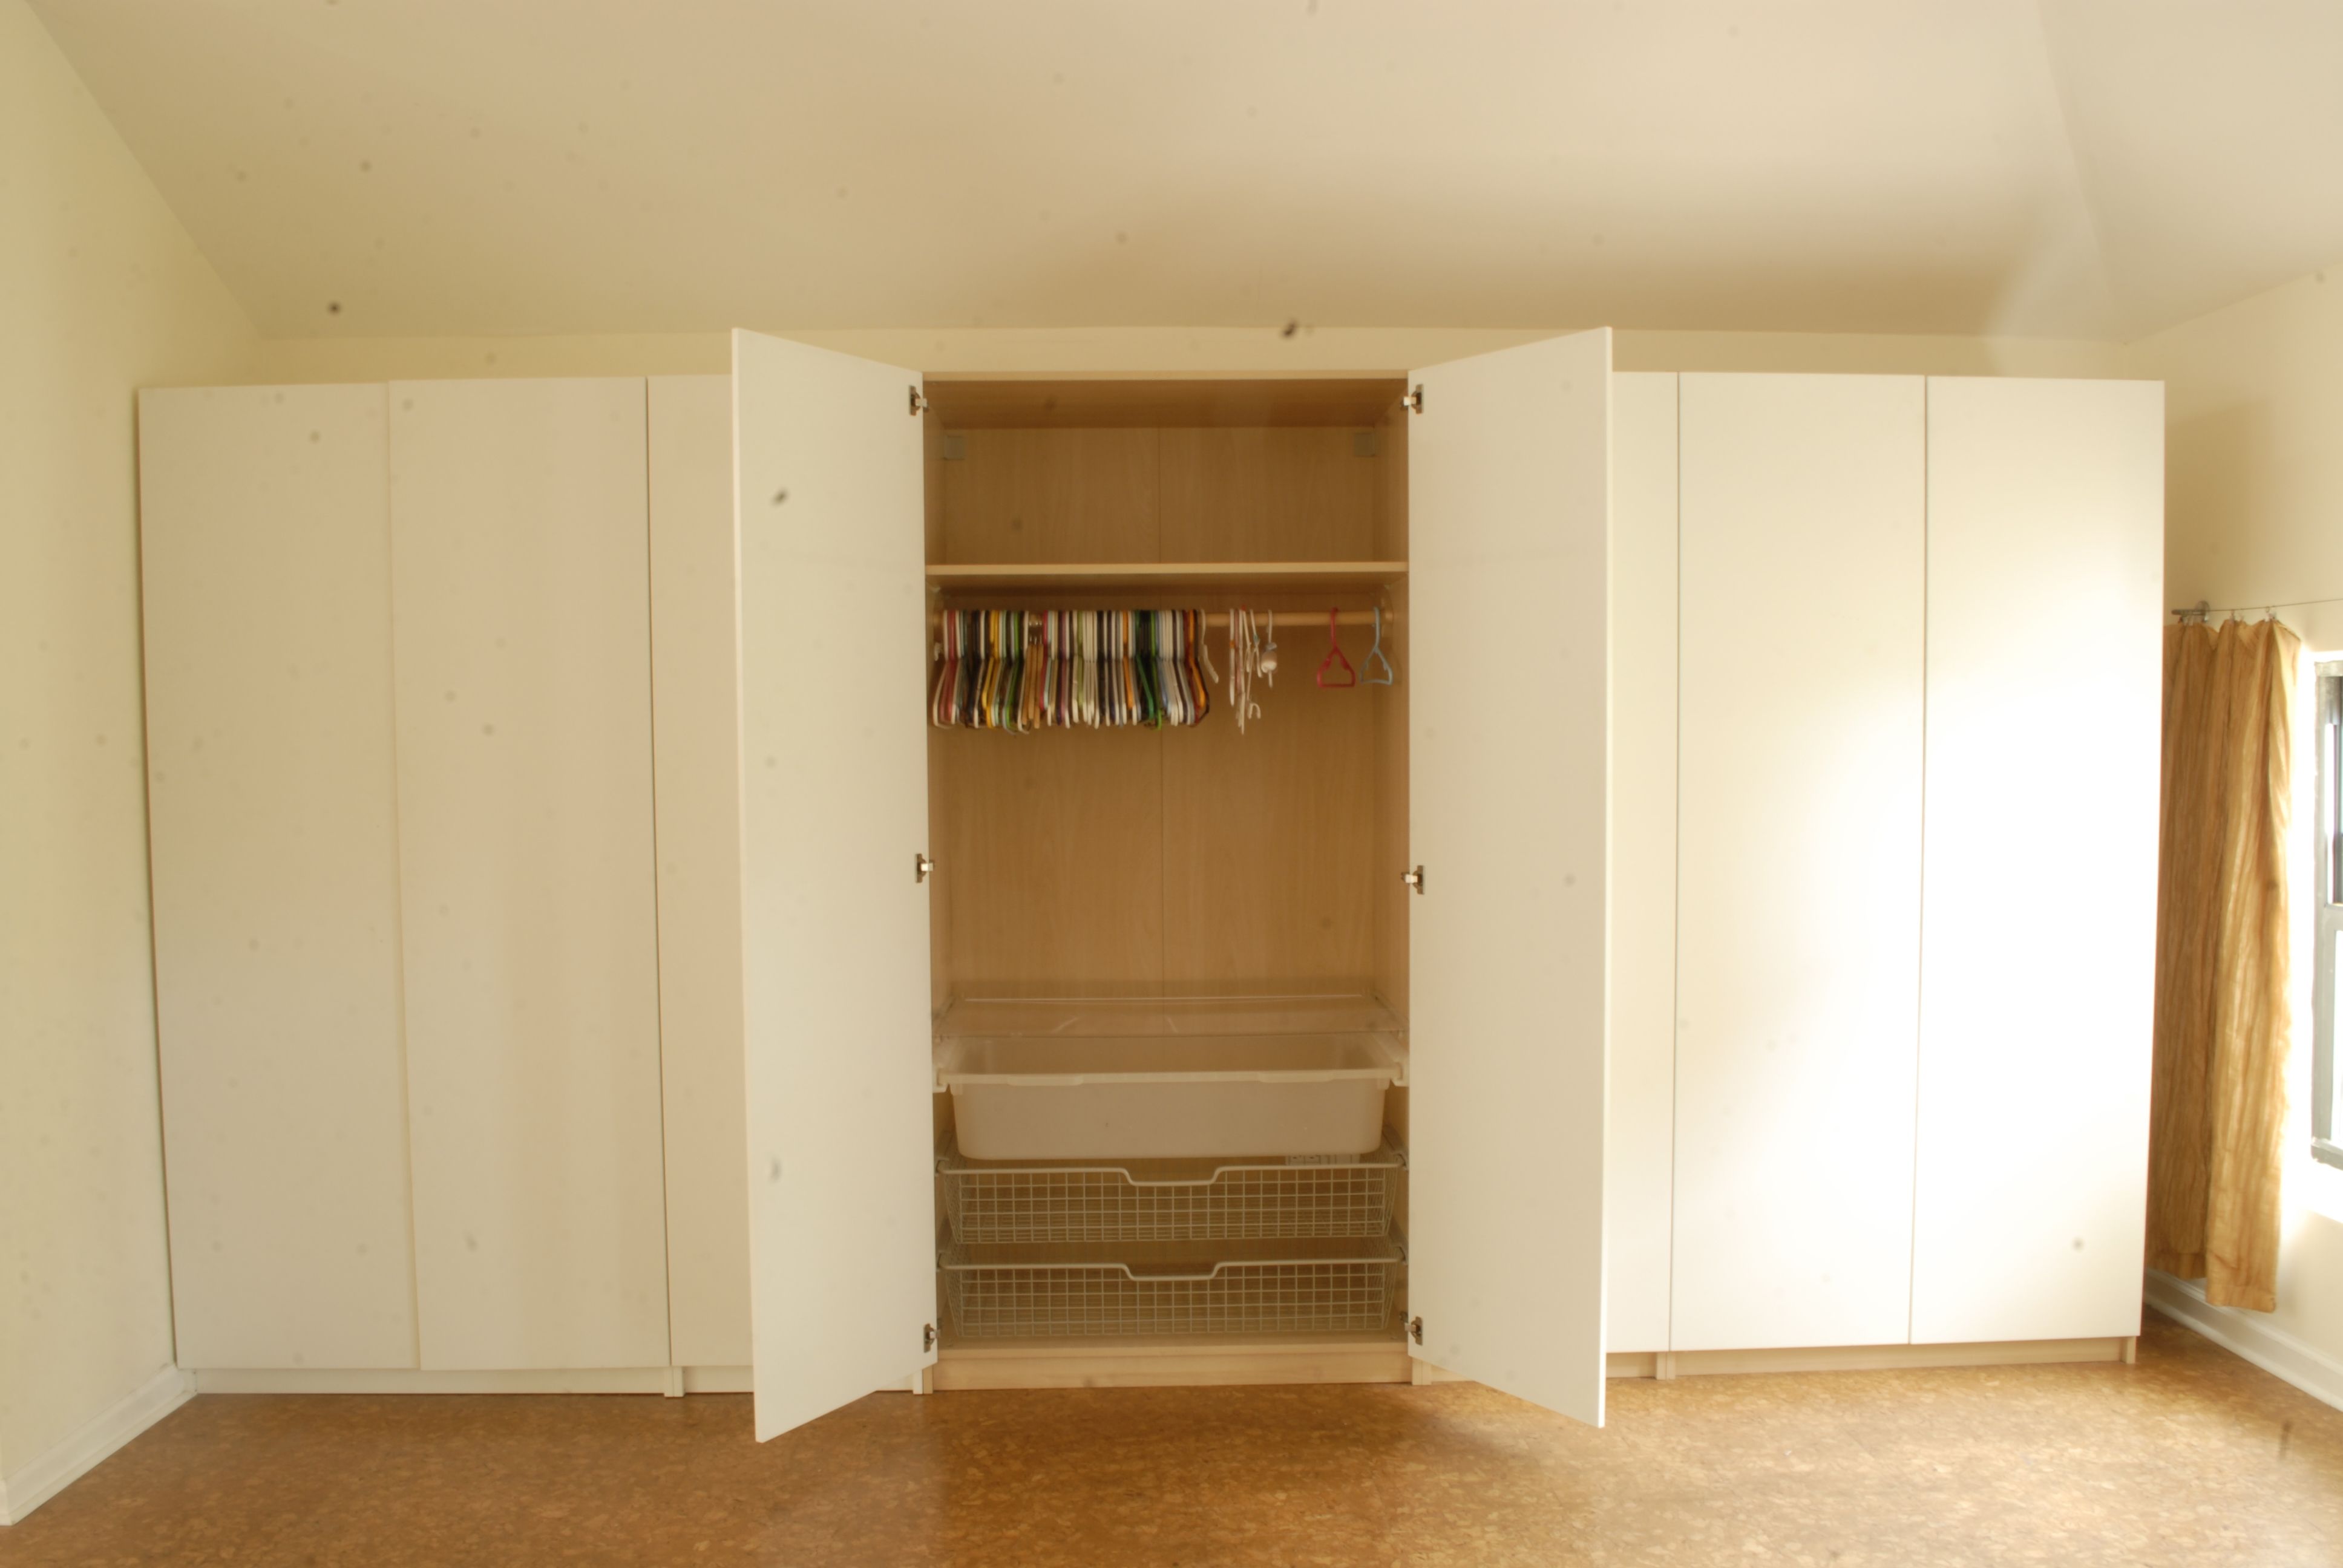 Inspiration Ideas Large Storage Cupboards With Munwar Lockable Intended For Large Storage Cupboards (View 8 of 12)